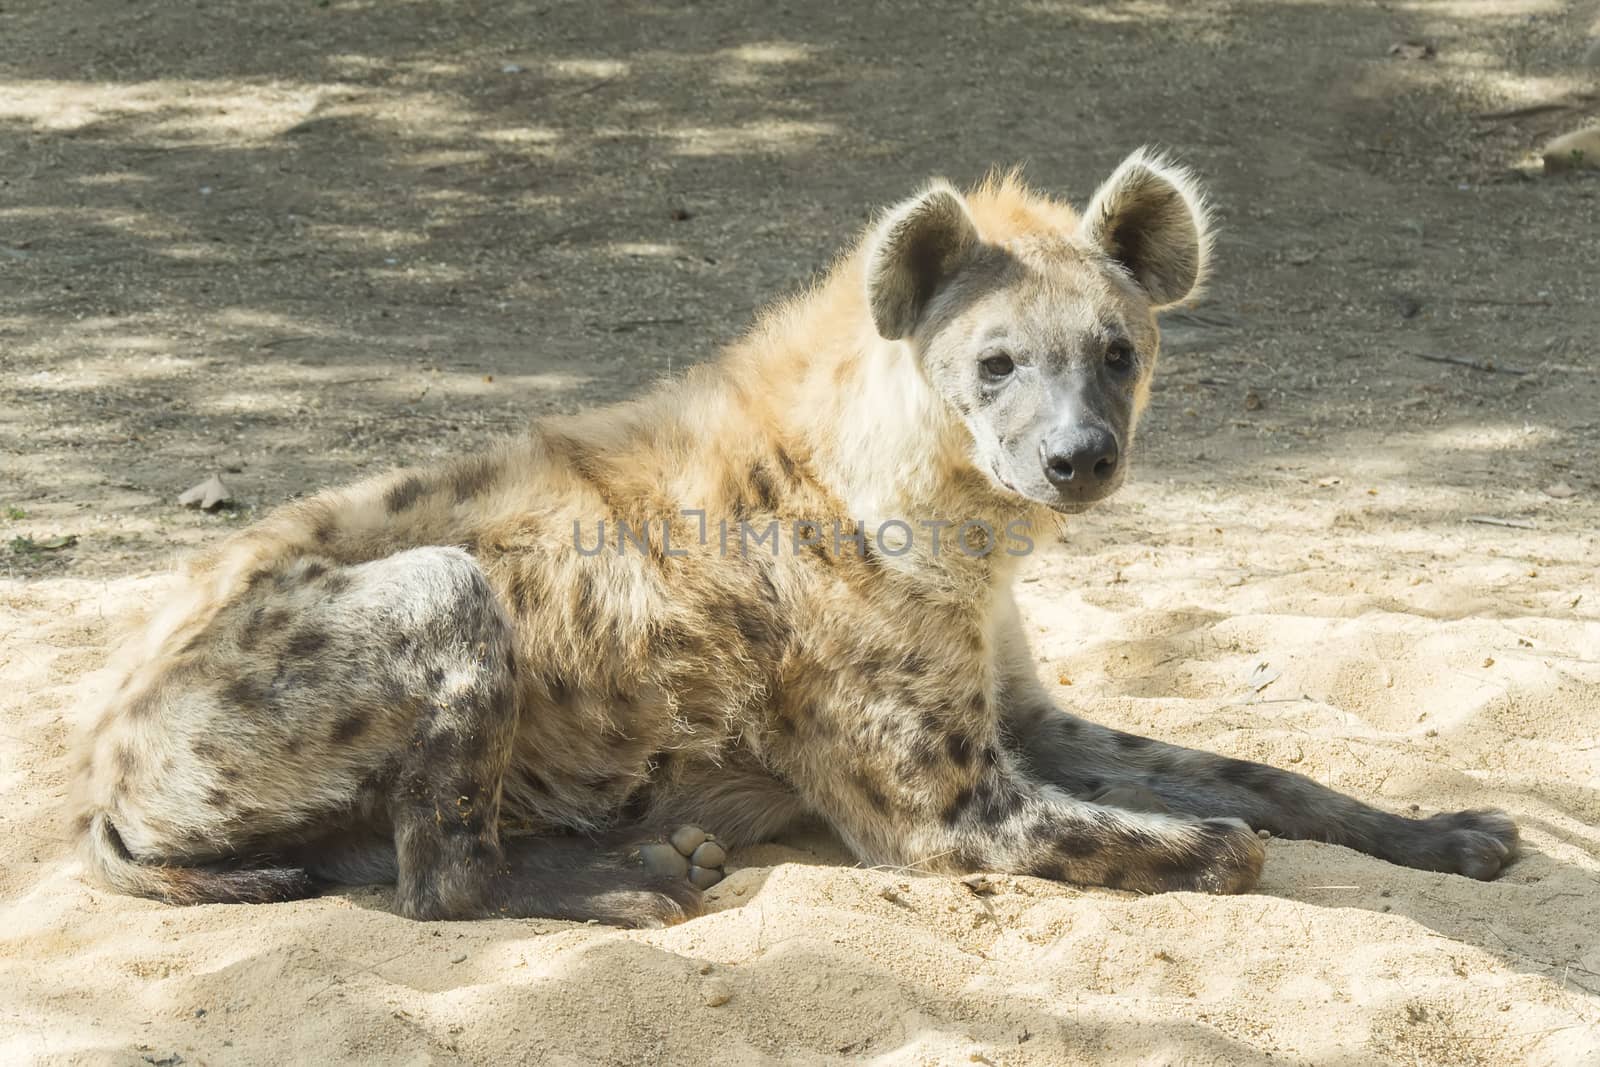 One Spotted hyaena staring at something by max8xam